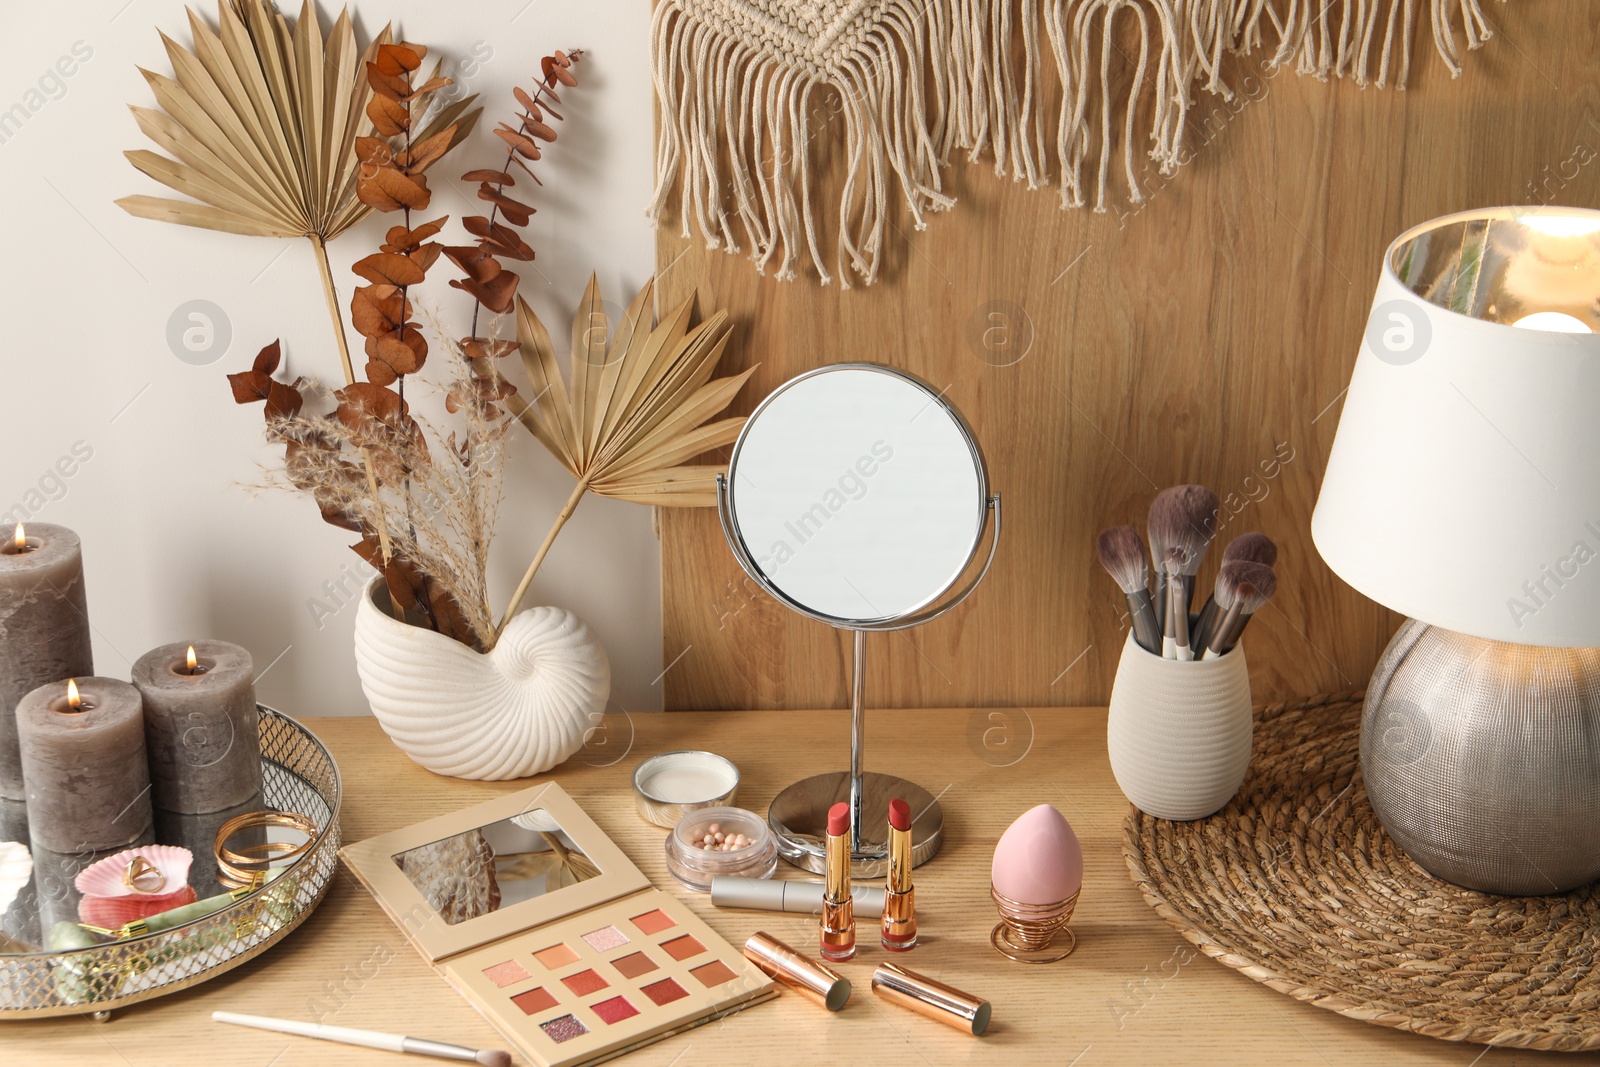 Photo of Makeup products, mirror and decor on wooden dressing table